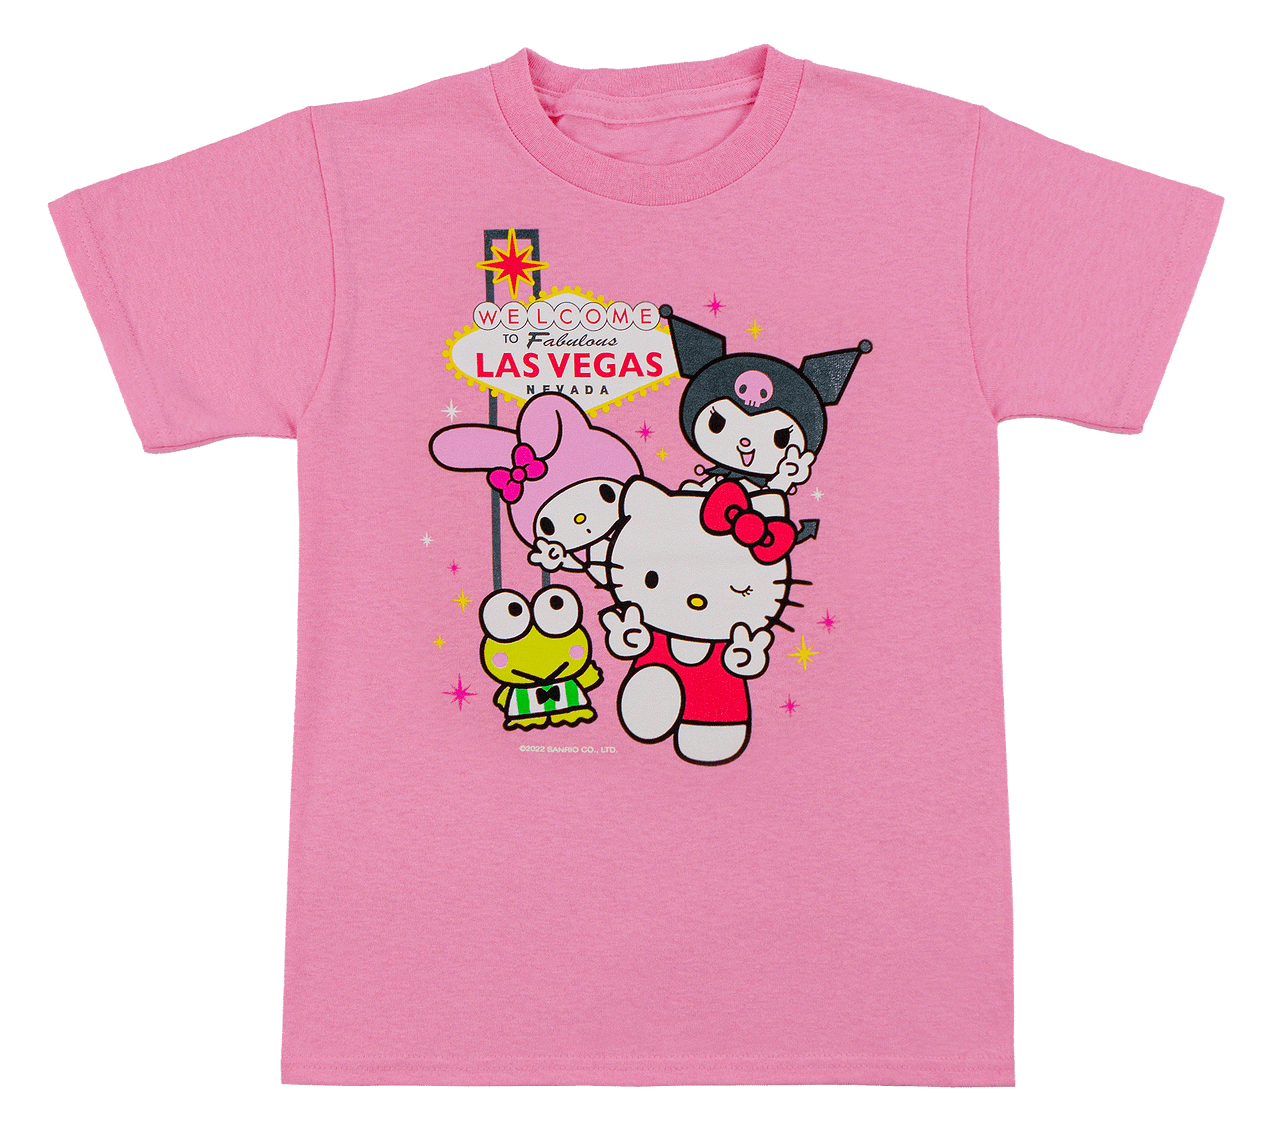 Hello Kitty Cafe Las Vegas - Find these Ice Cream t-shirts